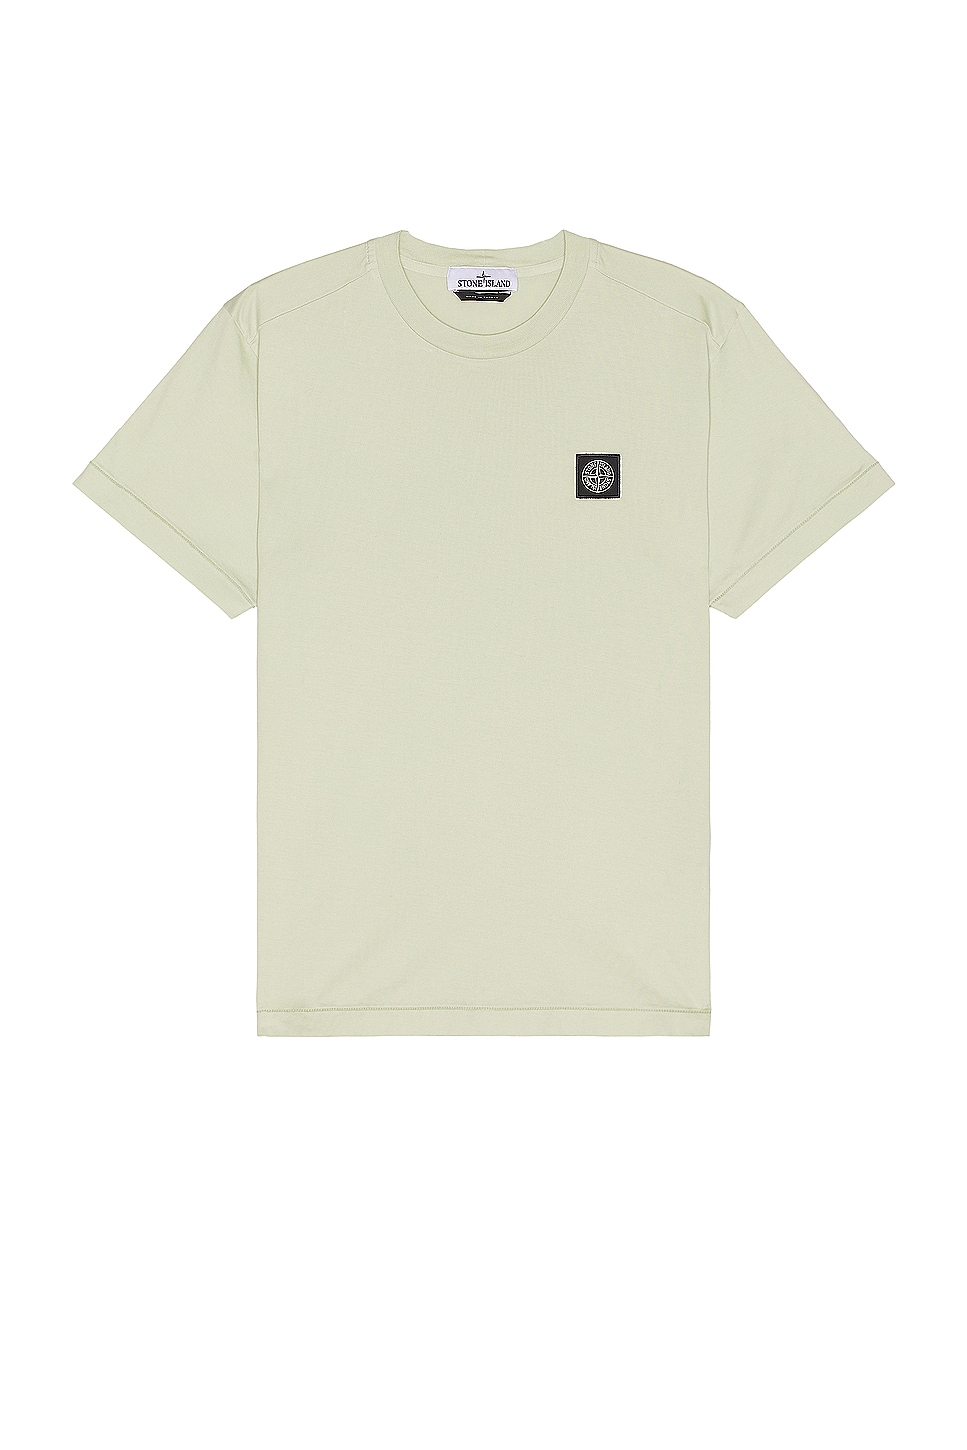 Image 1 of Stone Island T-shirt in Pistachio